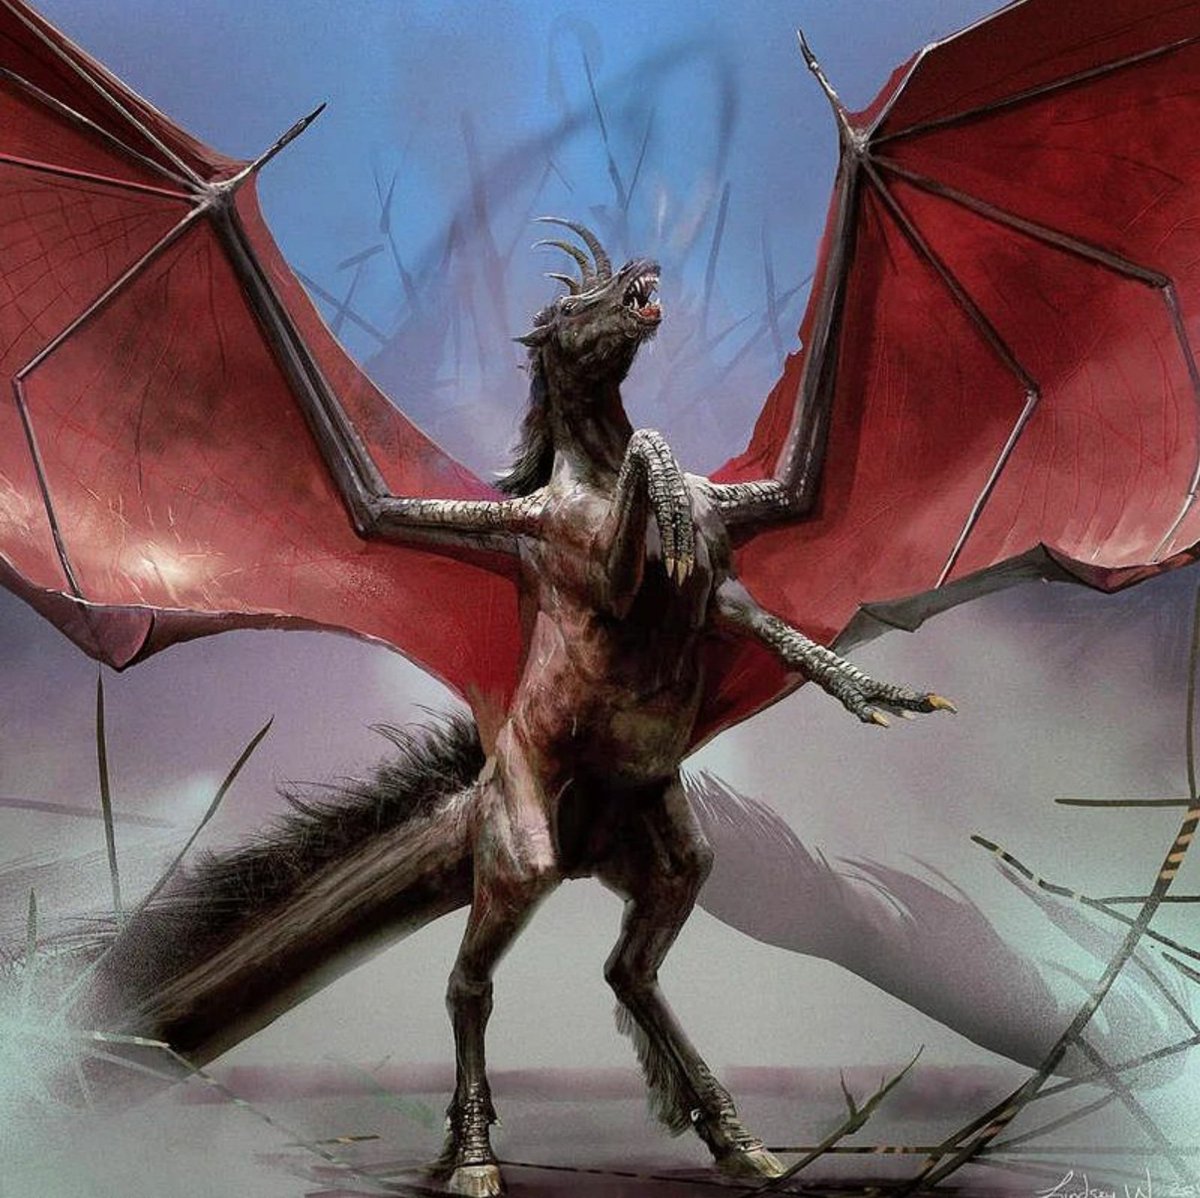 The nightmare that is the Jersey Devil • Art by LindseyWArt of Deviant Art • Even Joseph Bonaparte, elder brother of Napoleon, is claimed to have seen the Jersey Devil while hunting on his Bordentown estate about 1820. #jerseydevil #cryptid #cryptids #cryptozoology